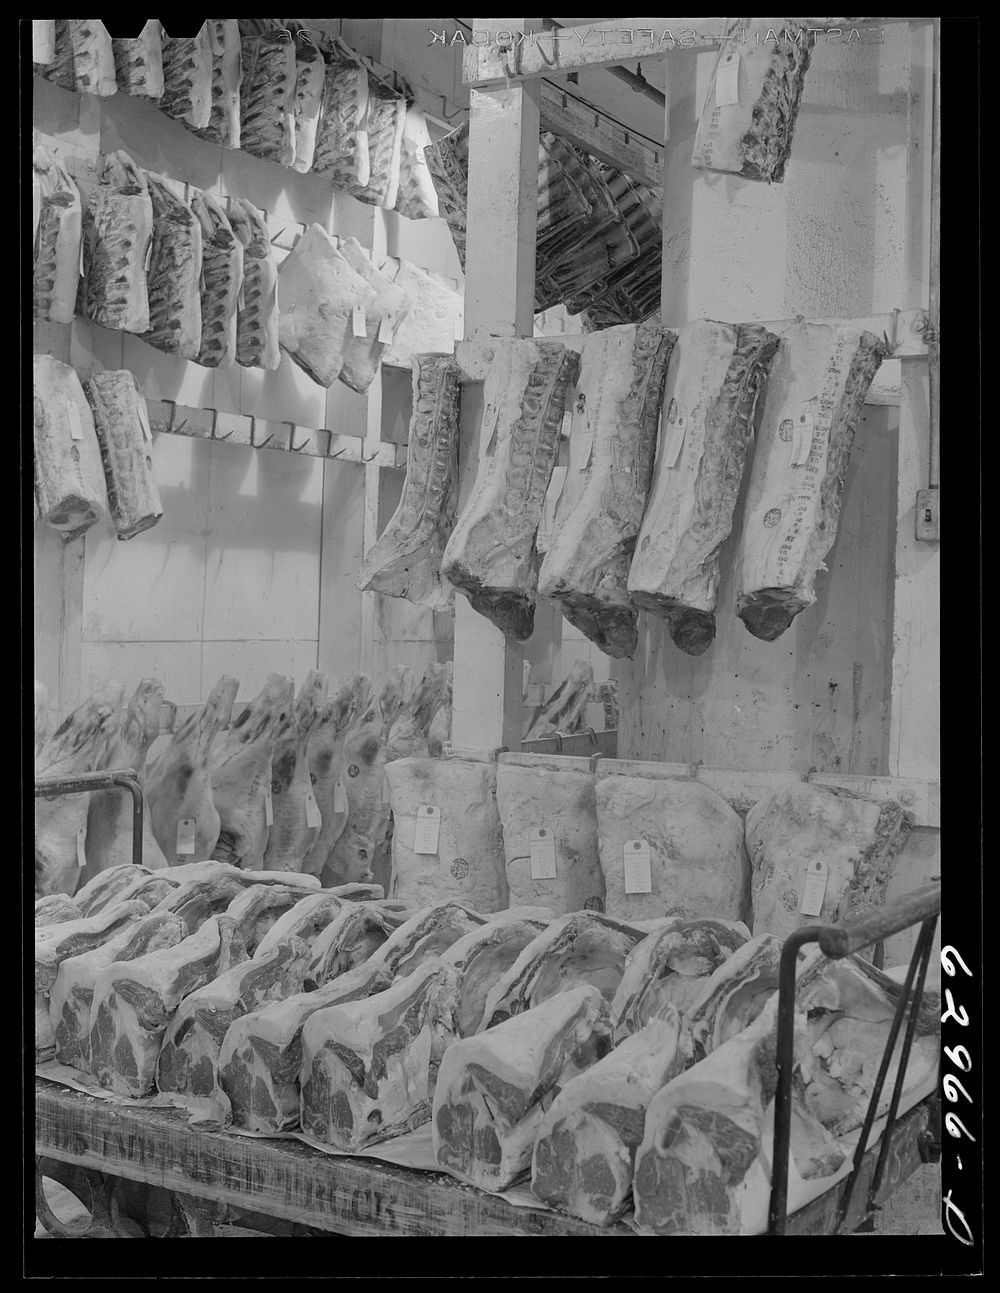 [Untitled photo, possibly related to: Meat in cold storage. Davidson Meat Company, suppliers of hotels, restaurants, etc.…